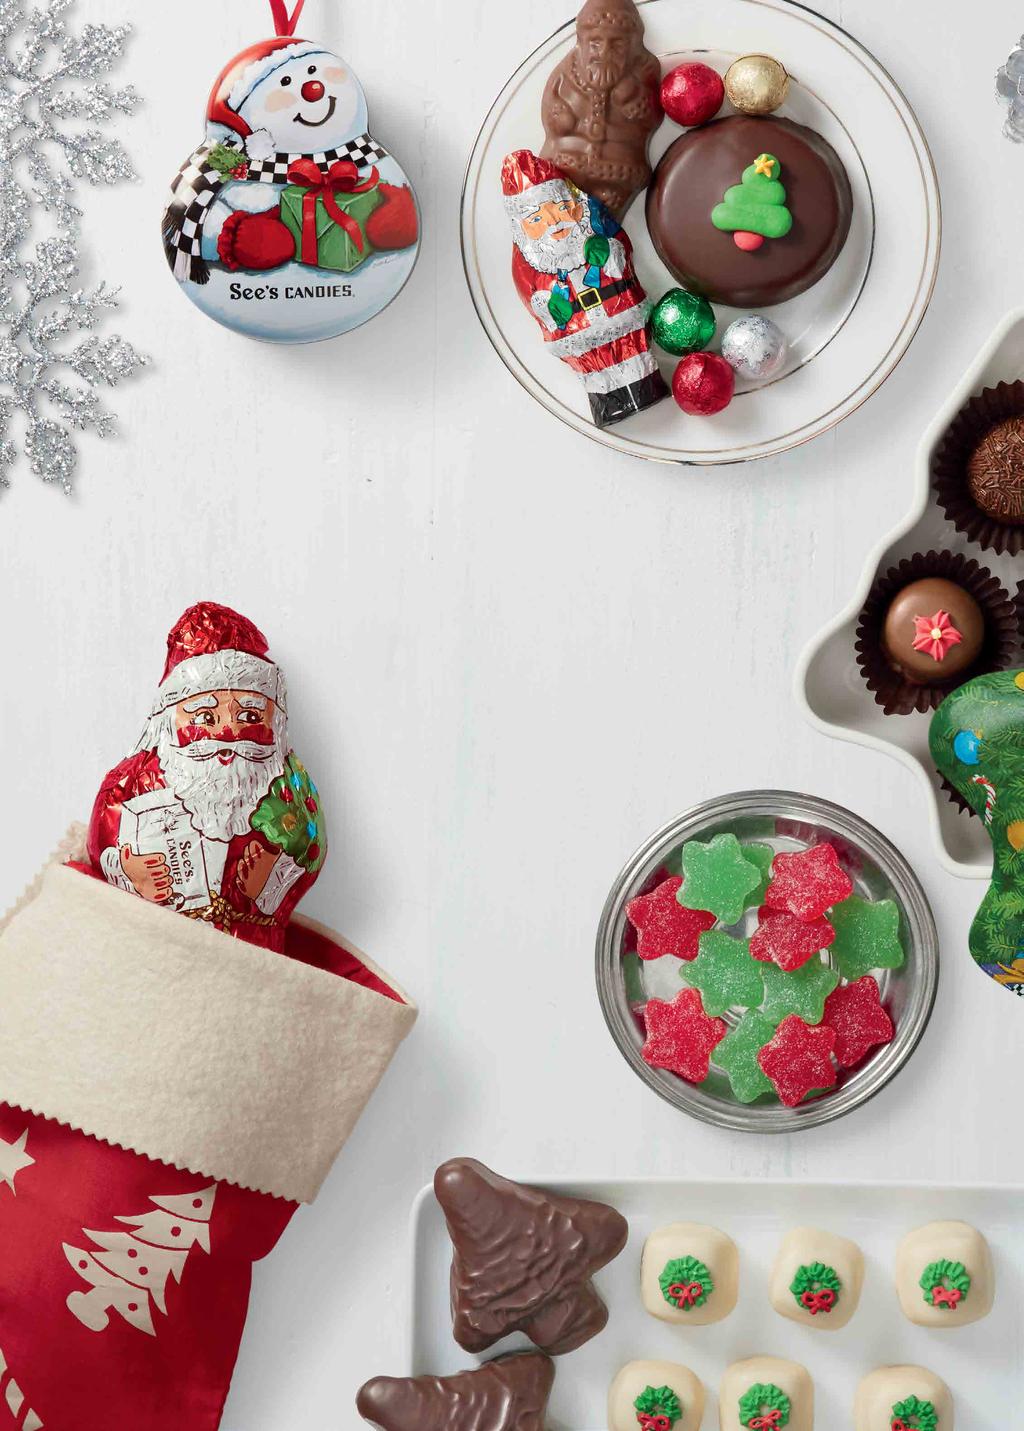 Dear friends, Make the holidays merry with the best stocking stuffers, hostess gifts and presents under the tree.